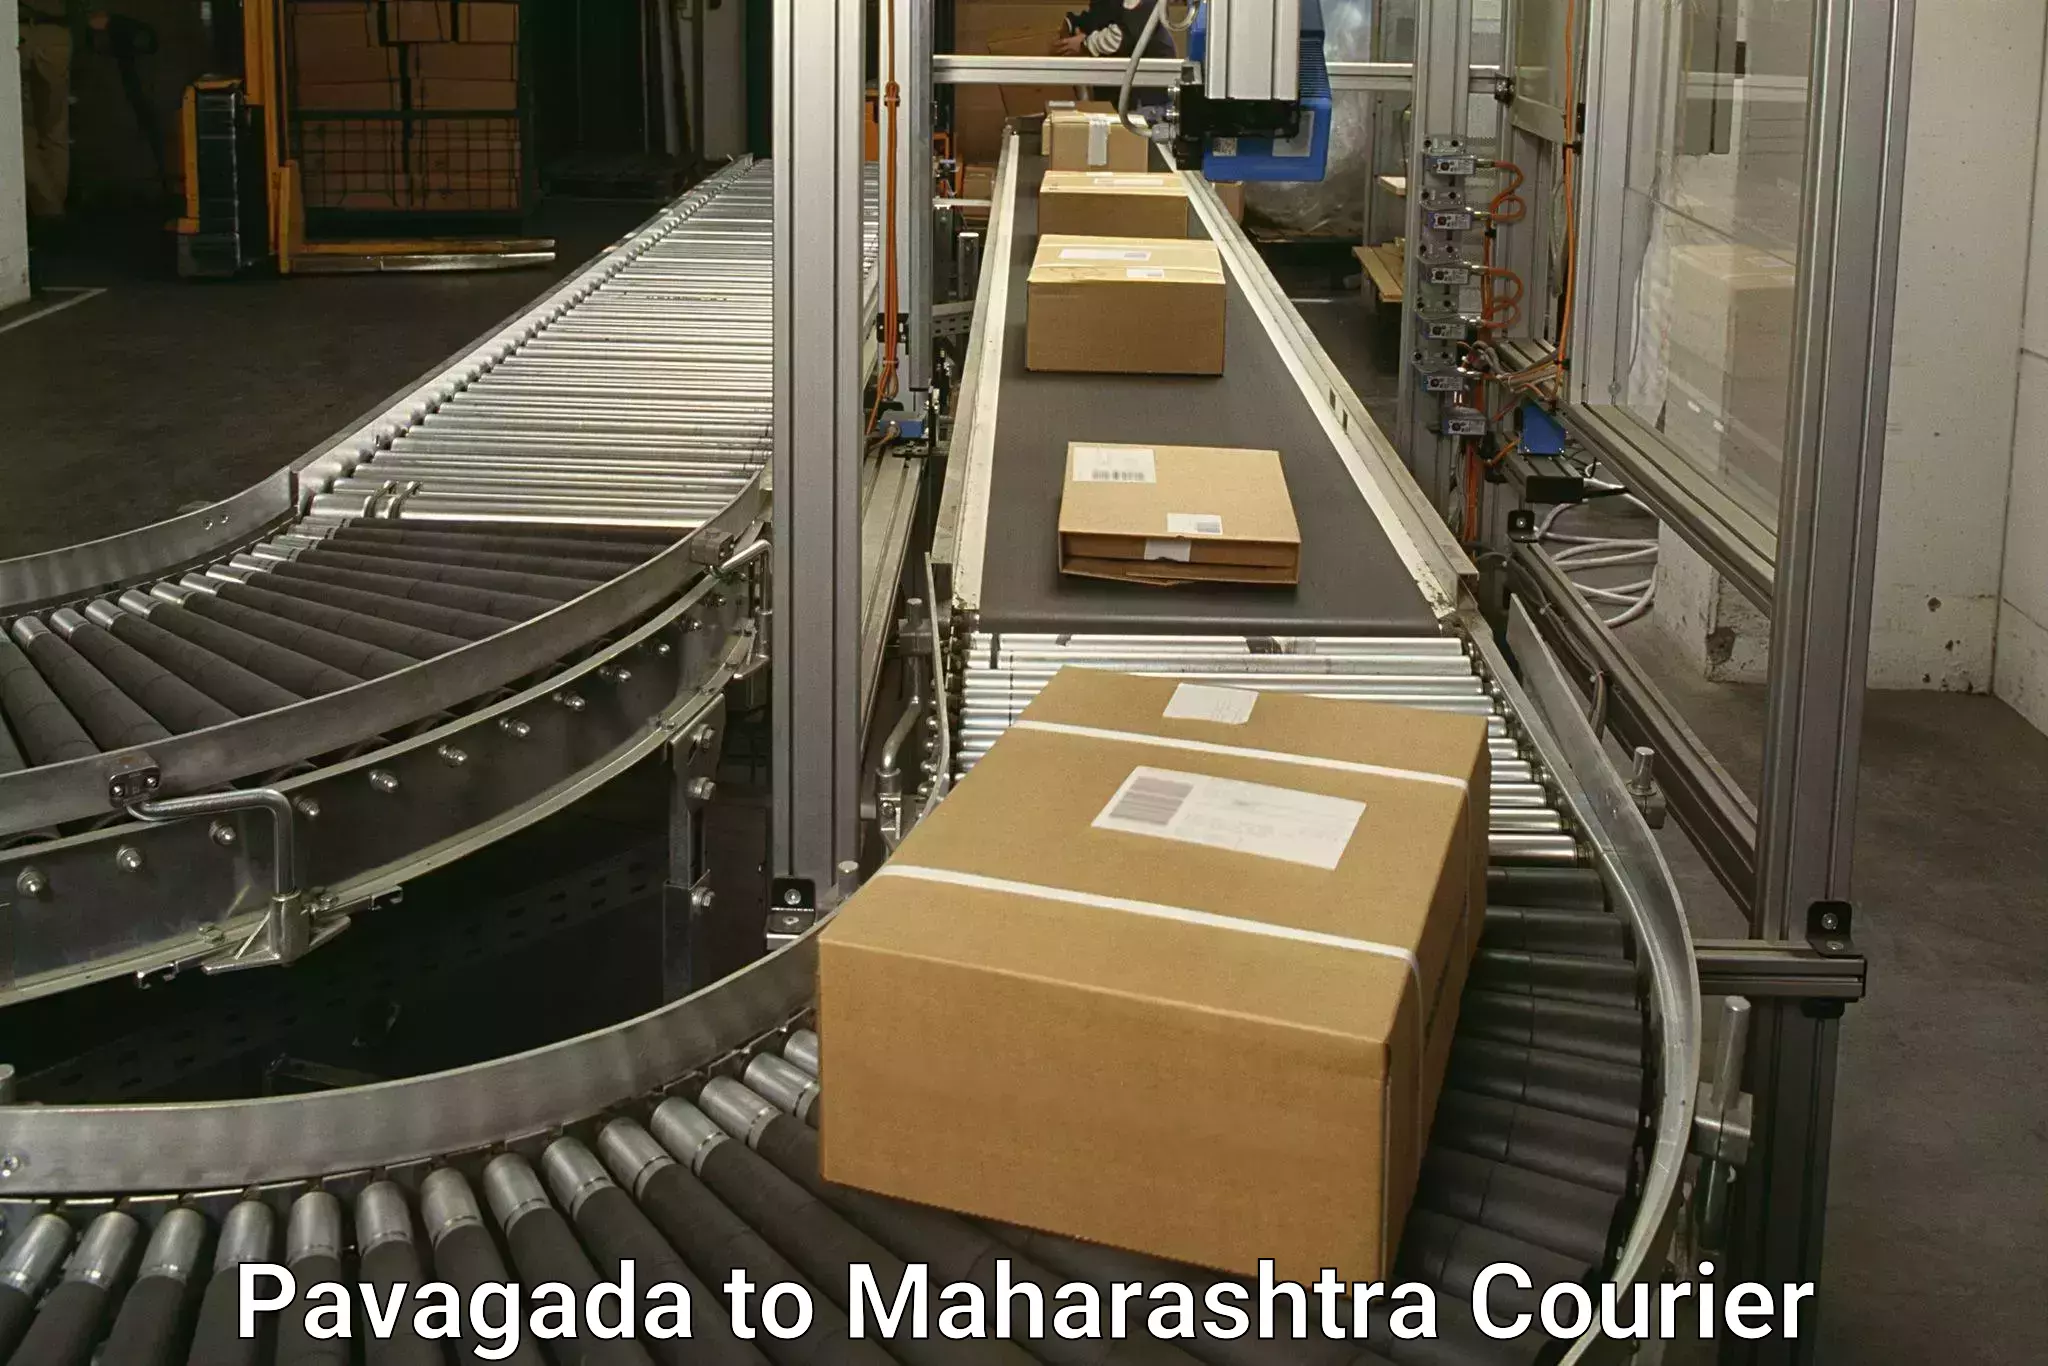 Courier service partnerships Pavagada to Dharmabad